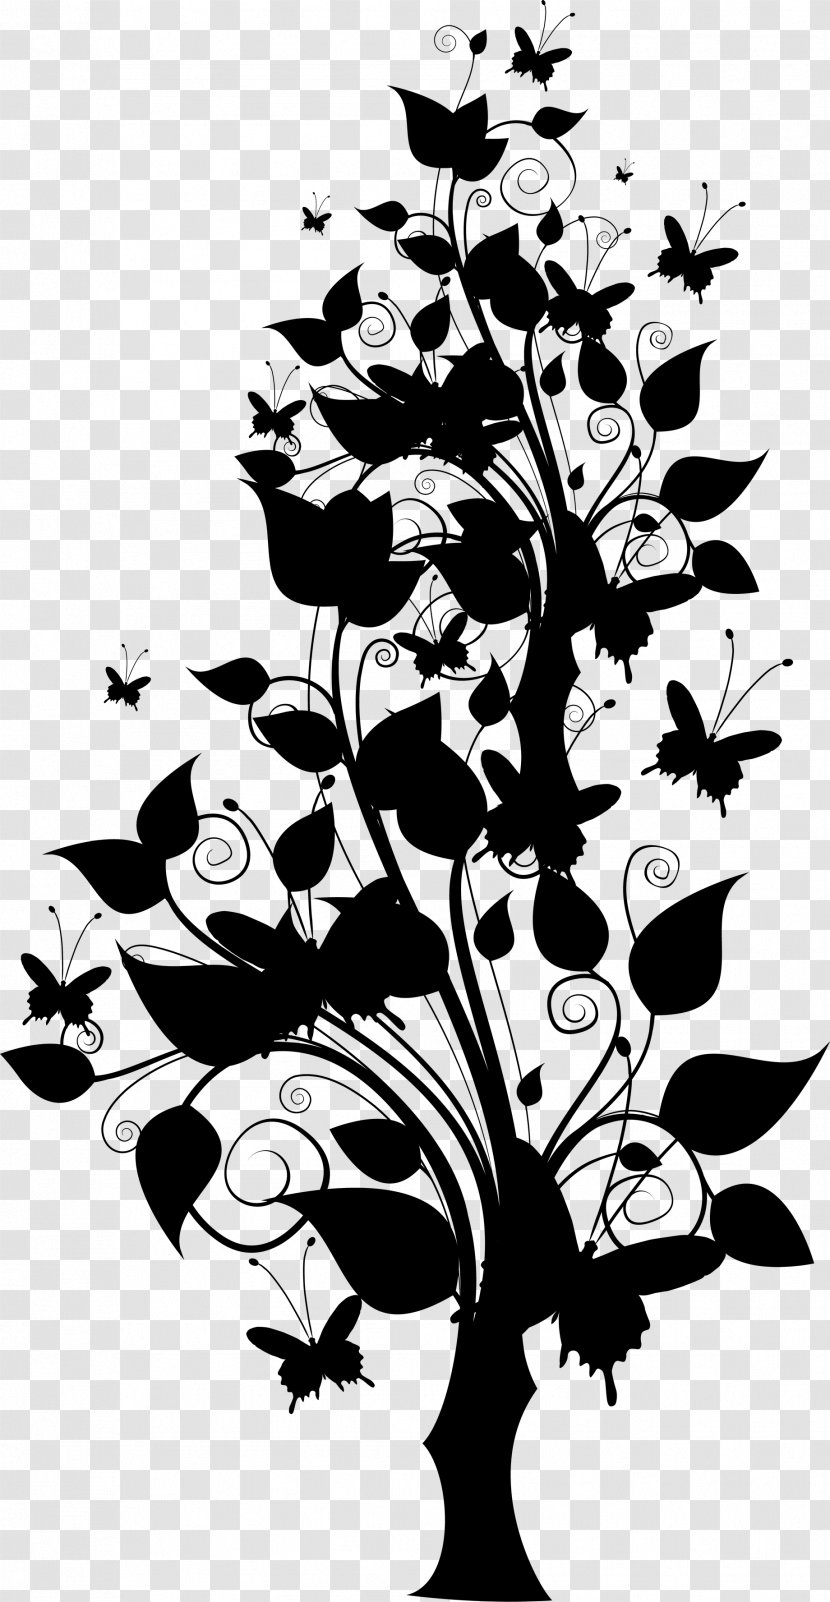 Floral Design Visual Arts Illustration Silhouette - Photography - Style Transparent PNG